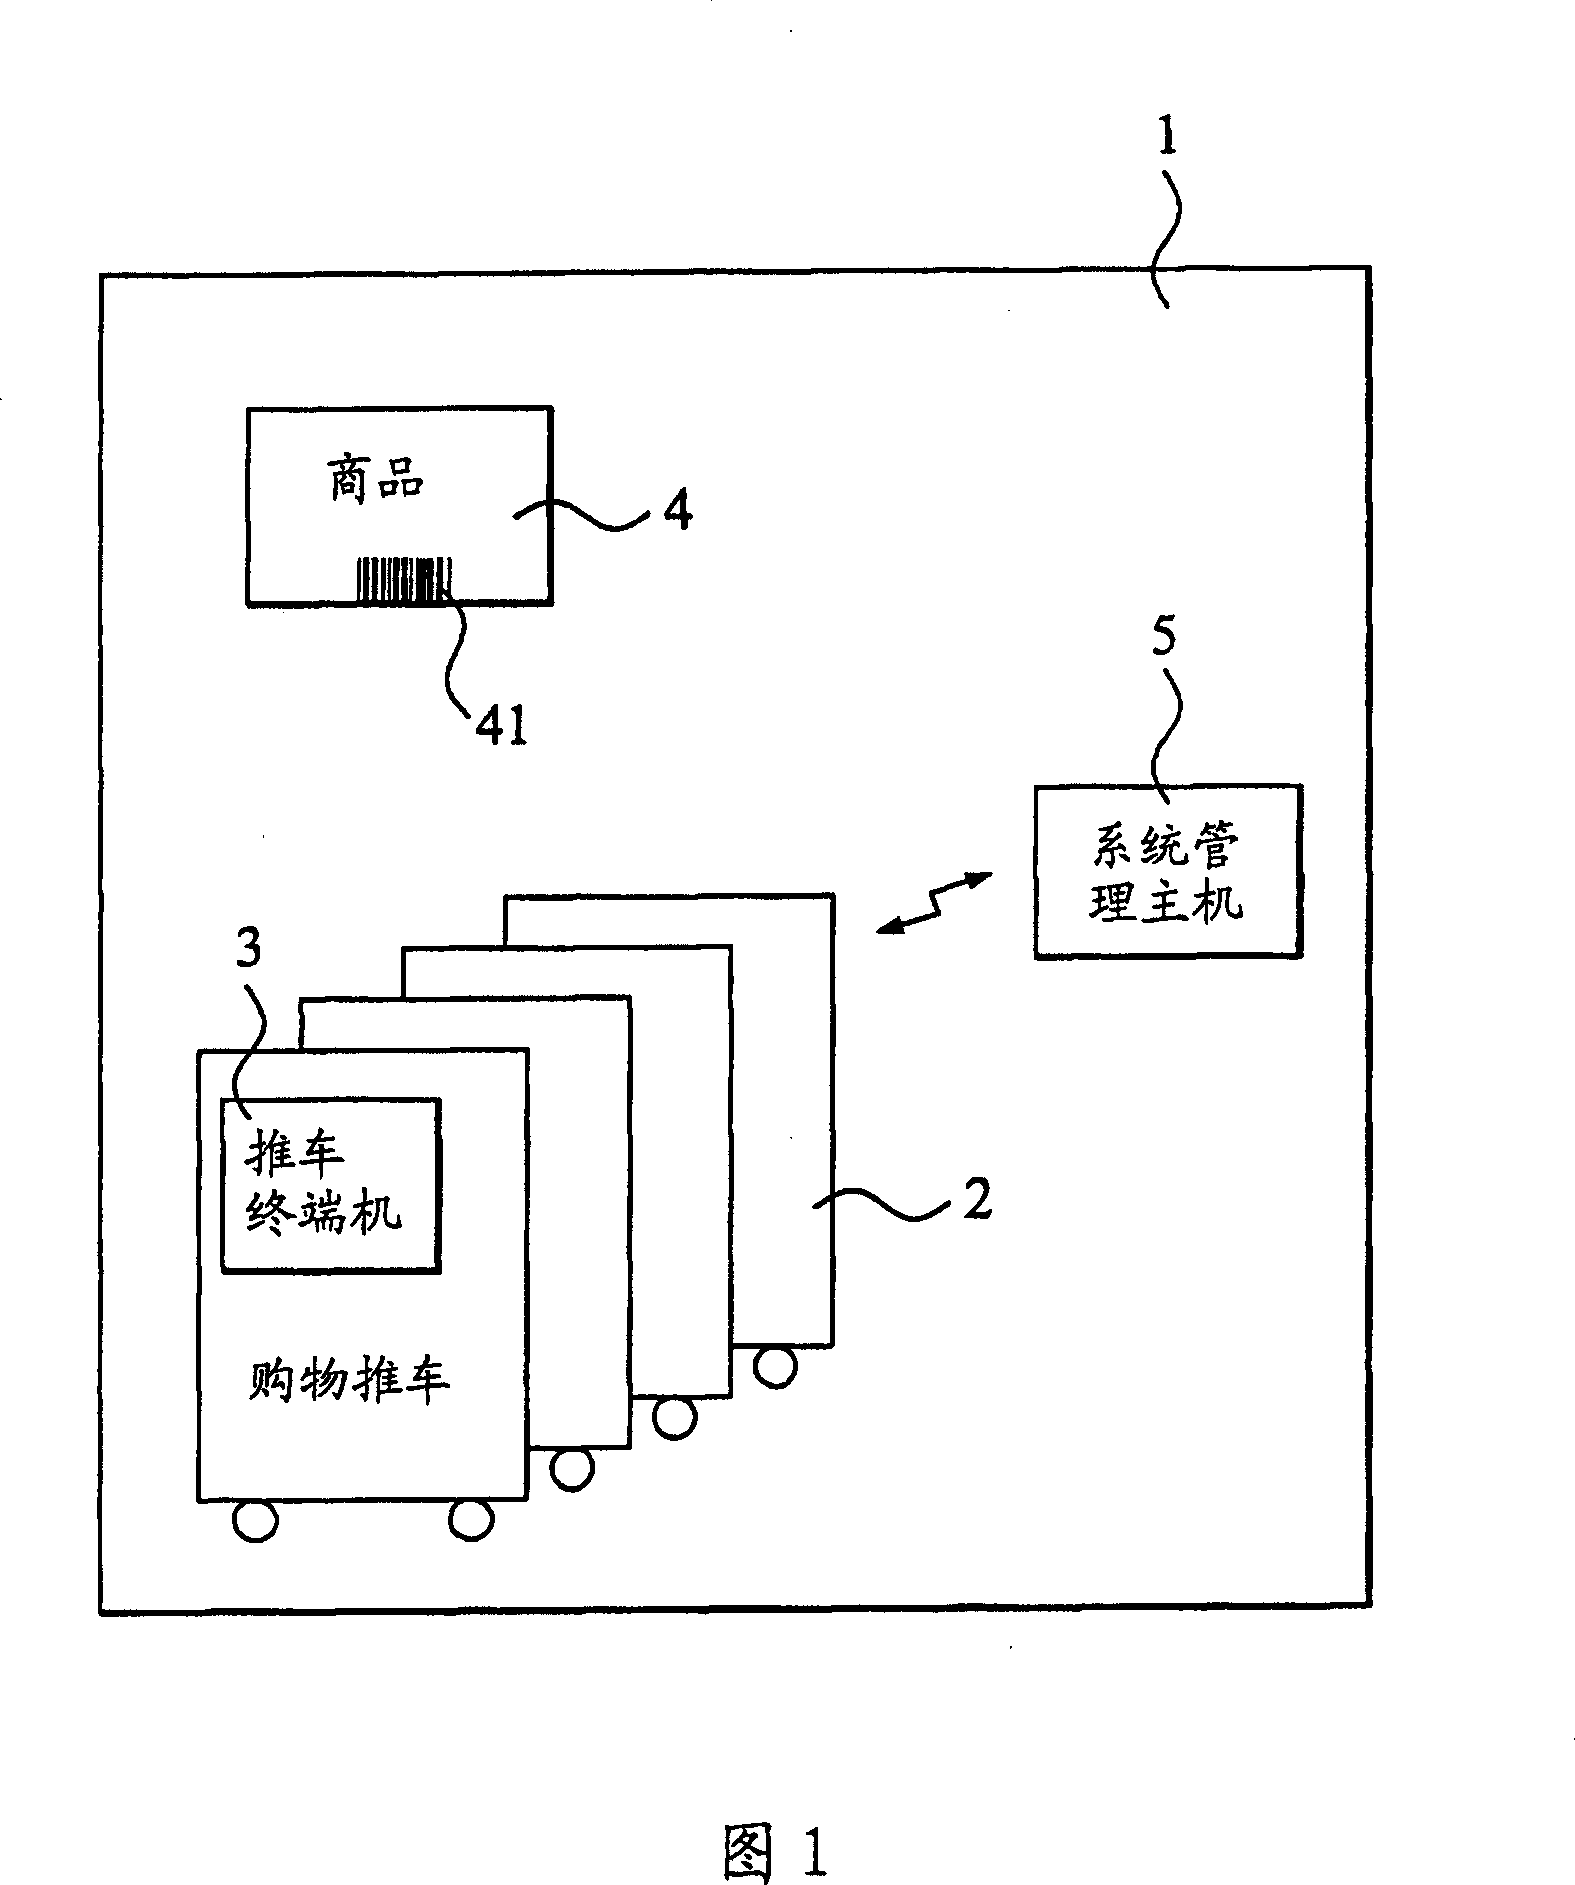 Automatic market shopping management system and method